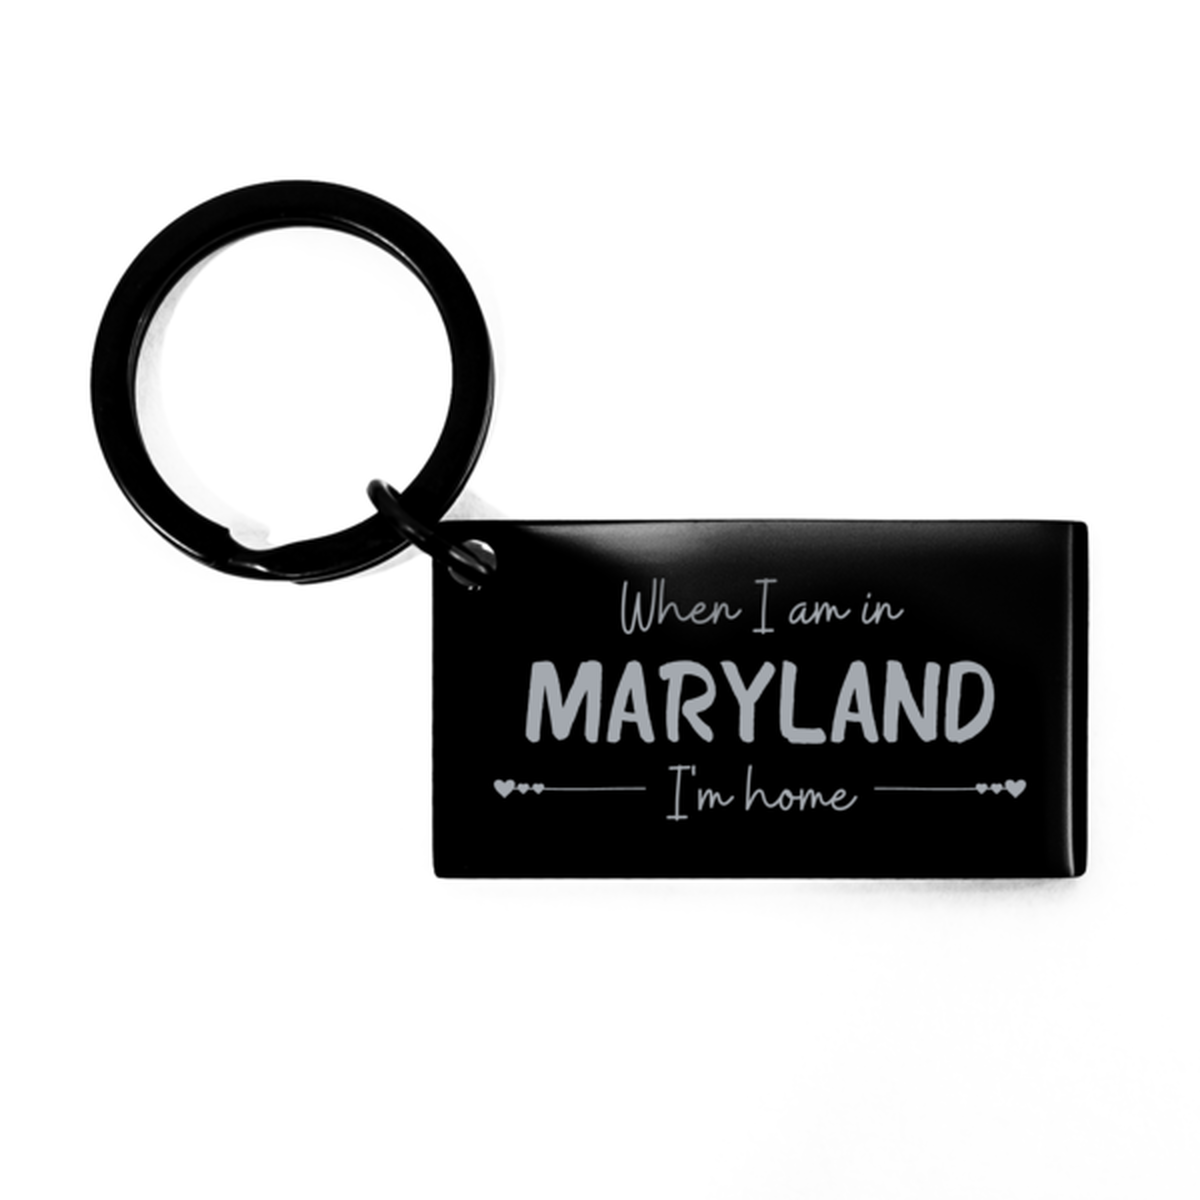 When I am in Maryland I'm home Keychain, Cheap Gifts For Maryland, State Maryland Birthday Gifts for Friends Coworker